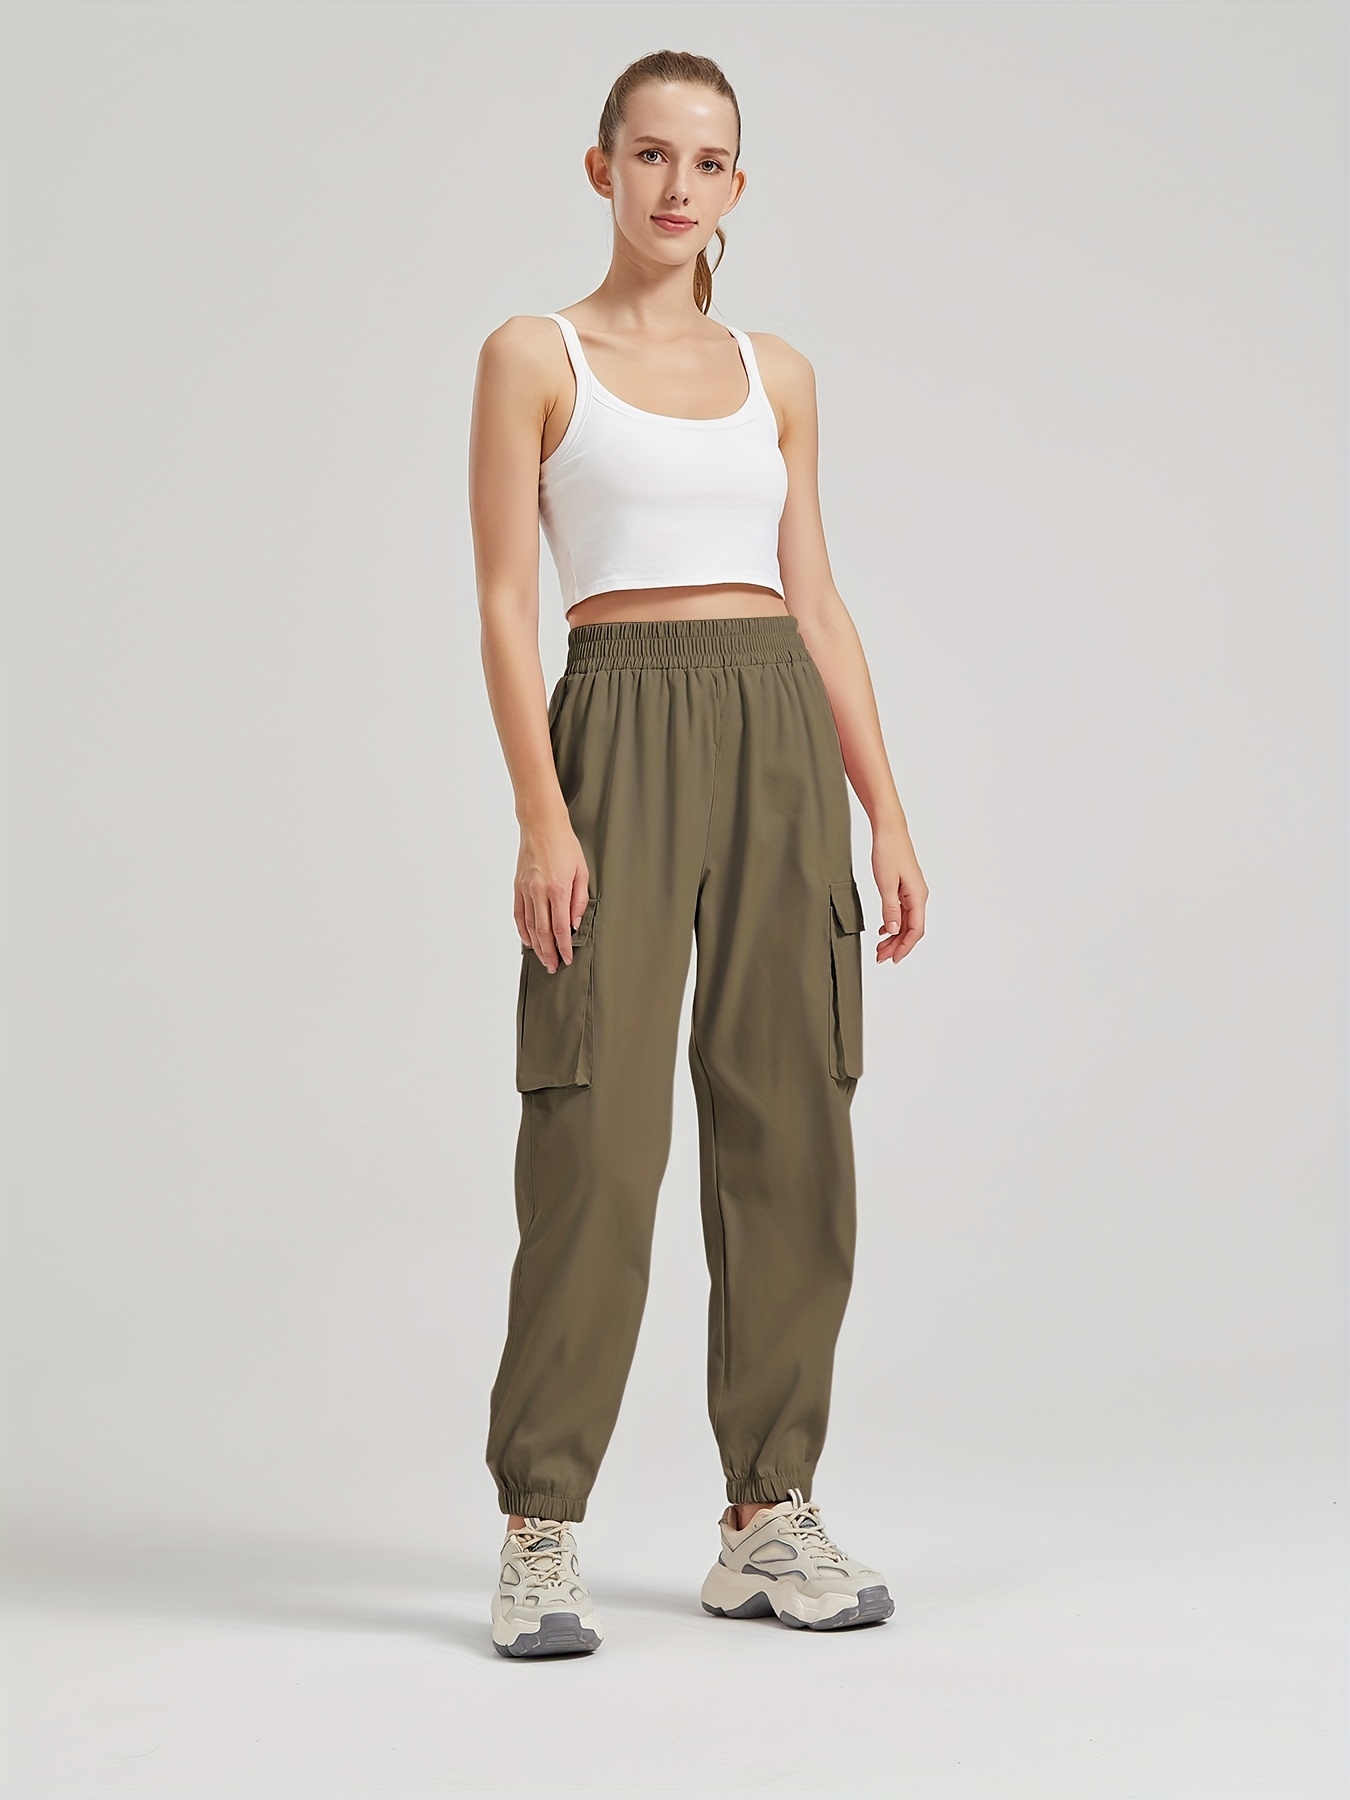 Solid Color Casual Joggers Sweatpant Cargo Loose High Waisted